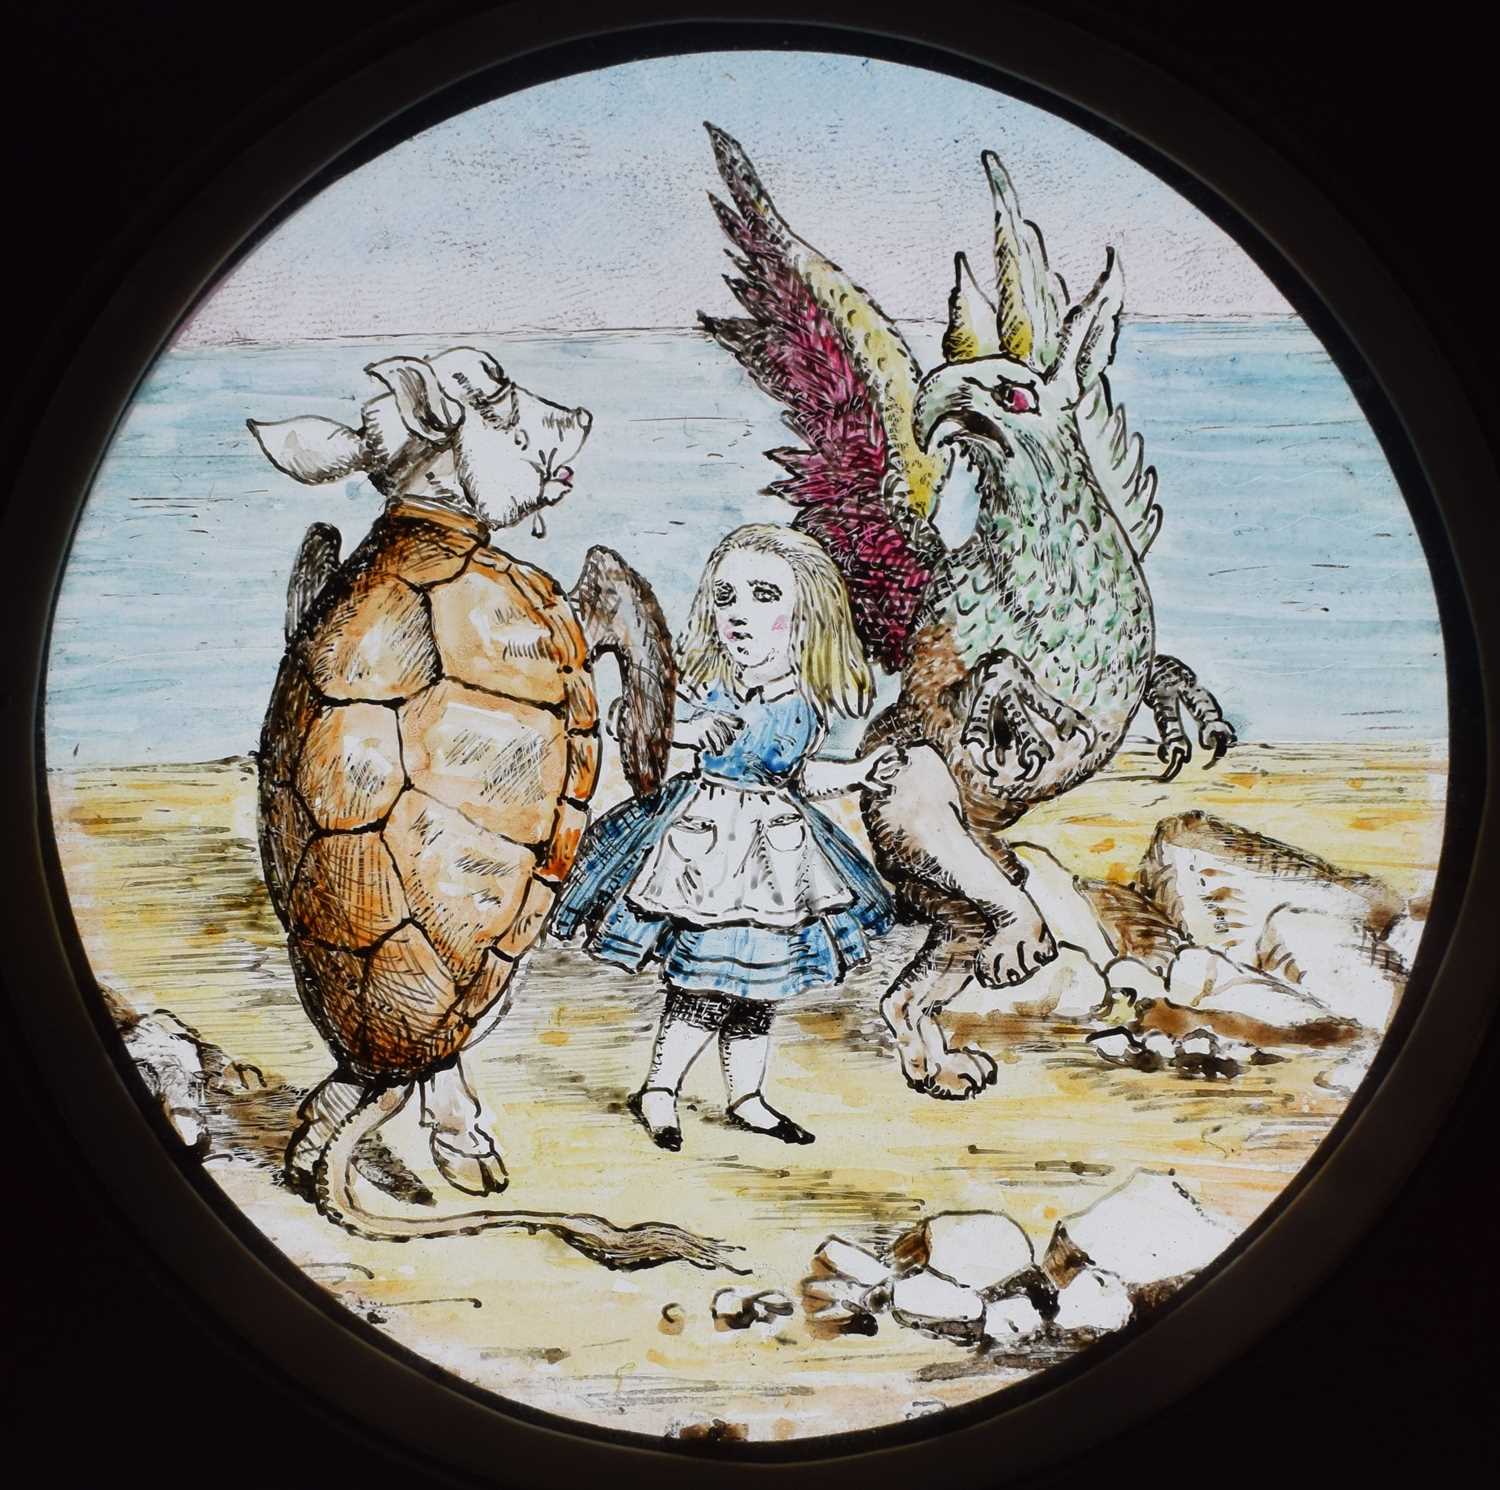 Magic Lantern Slides, Hand painted. Alice's Adventures in Wonderland & Through the Looking Glass. A - Image 39 of 48